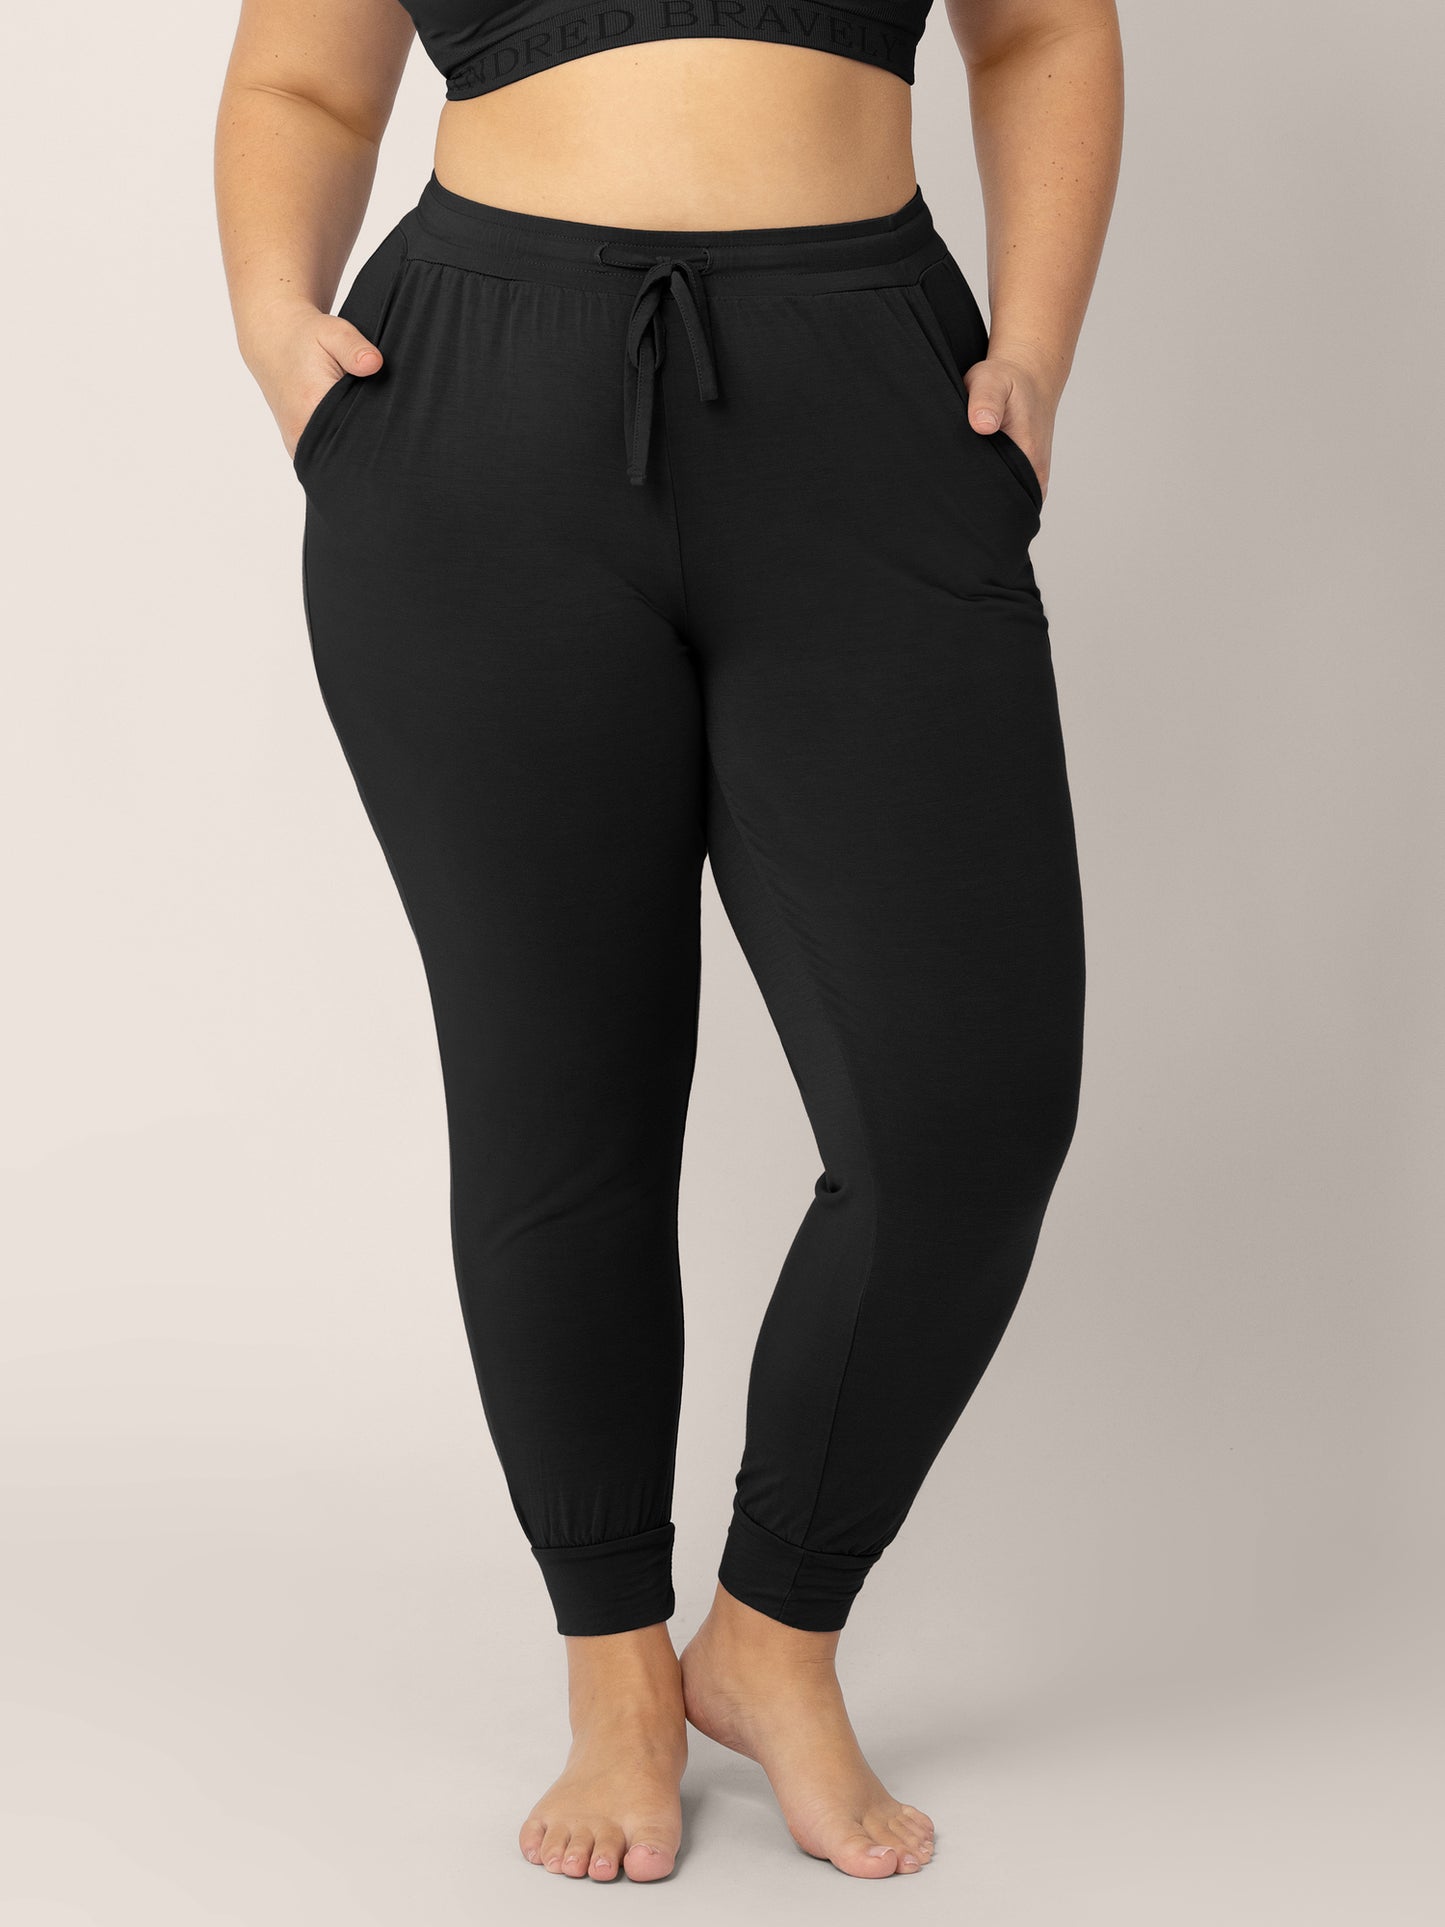 Bottom half of a model wearing the Everyday Lounge Jogger in Black. @model_info:Venezia is 5'6" and wearing an X-Large Regular.